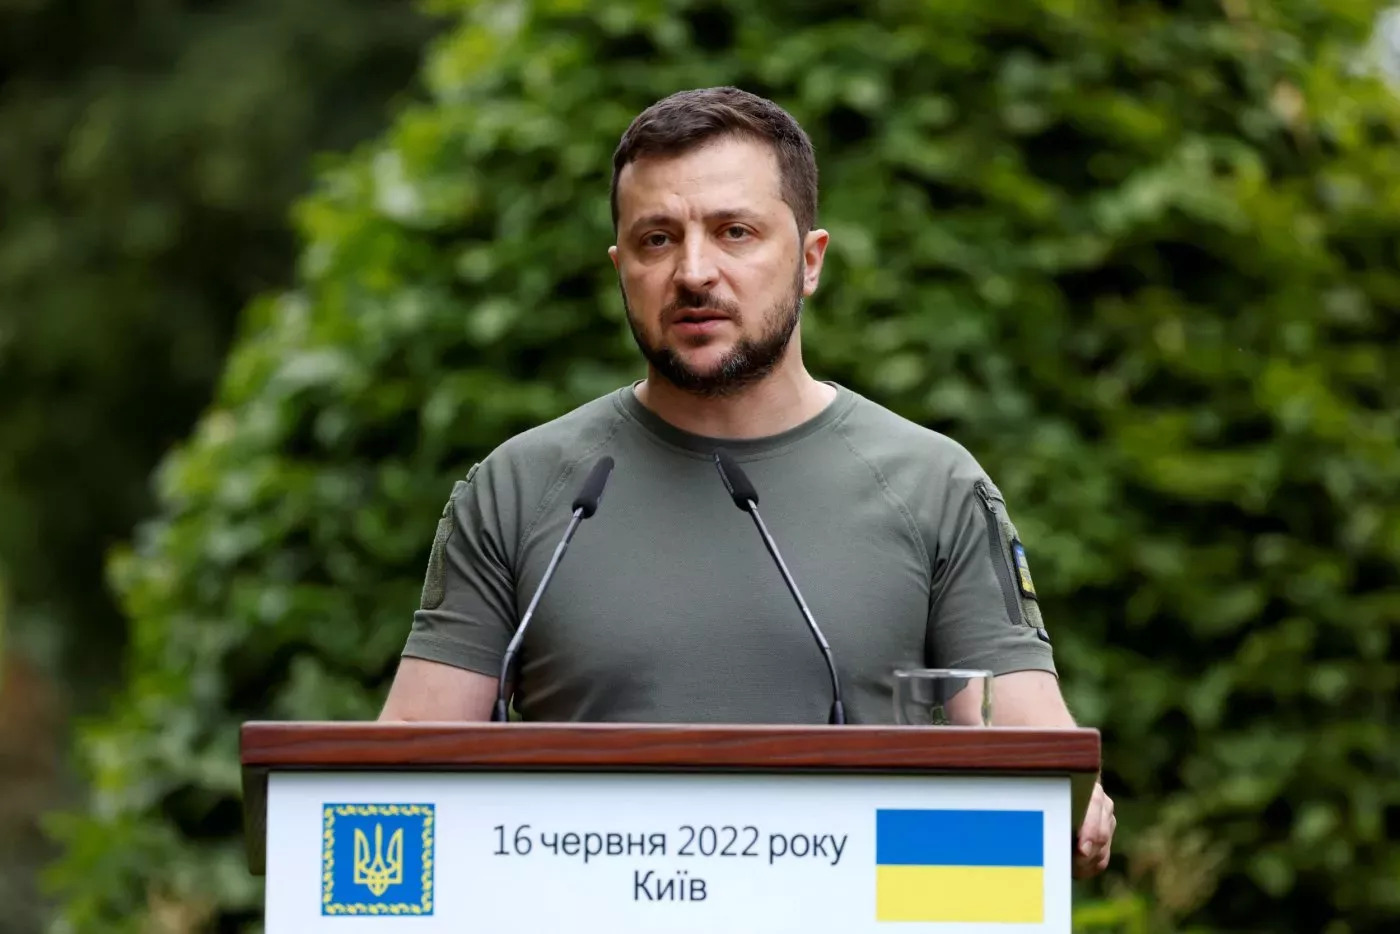 Ukrainian President Volodymyr Zelenskyy said Africa has been “taken hostage” in the Russian invasion, claiming that the Kremlin is trying to use “the suffering of the people to put pressure on the democracies that have imposed sanctions” against it. 